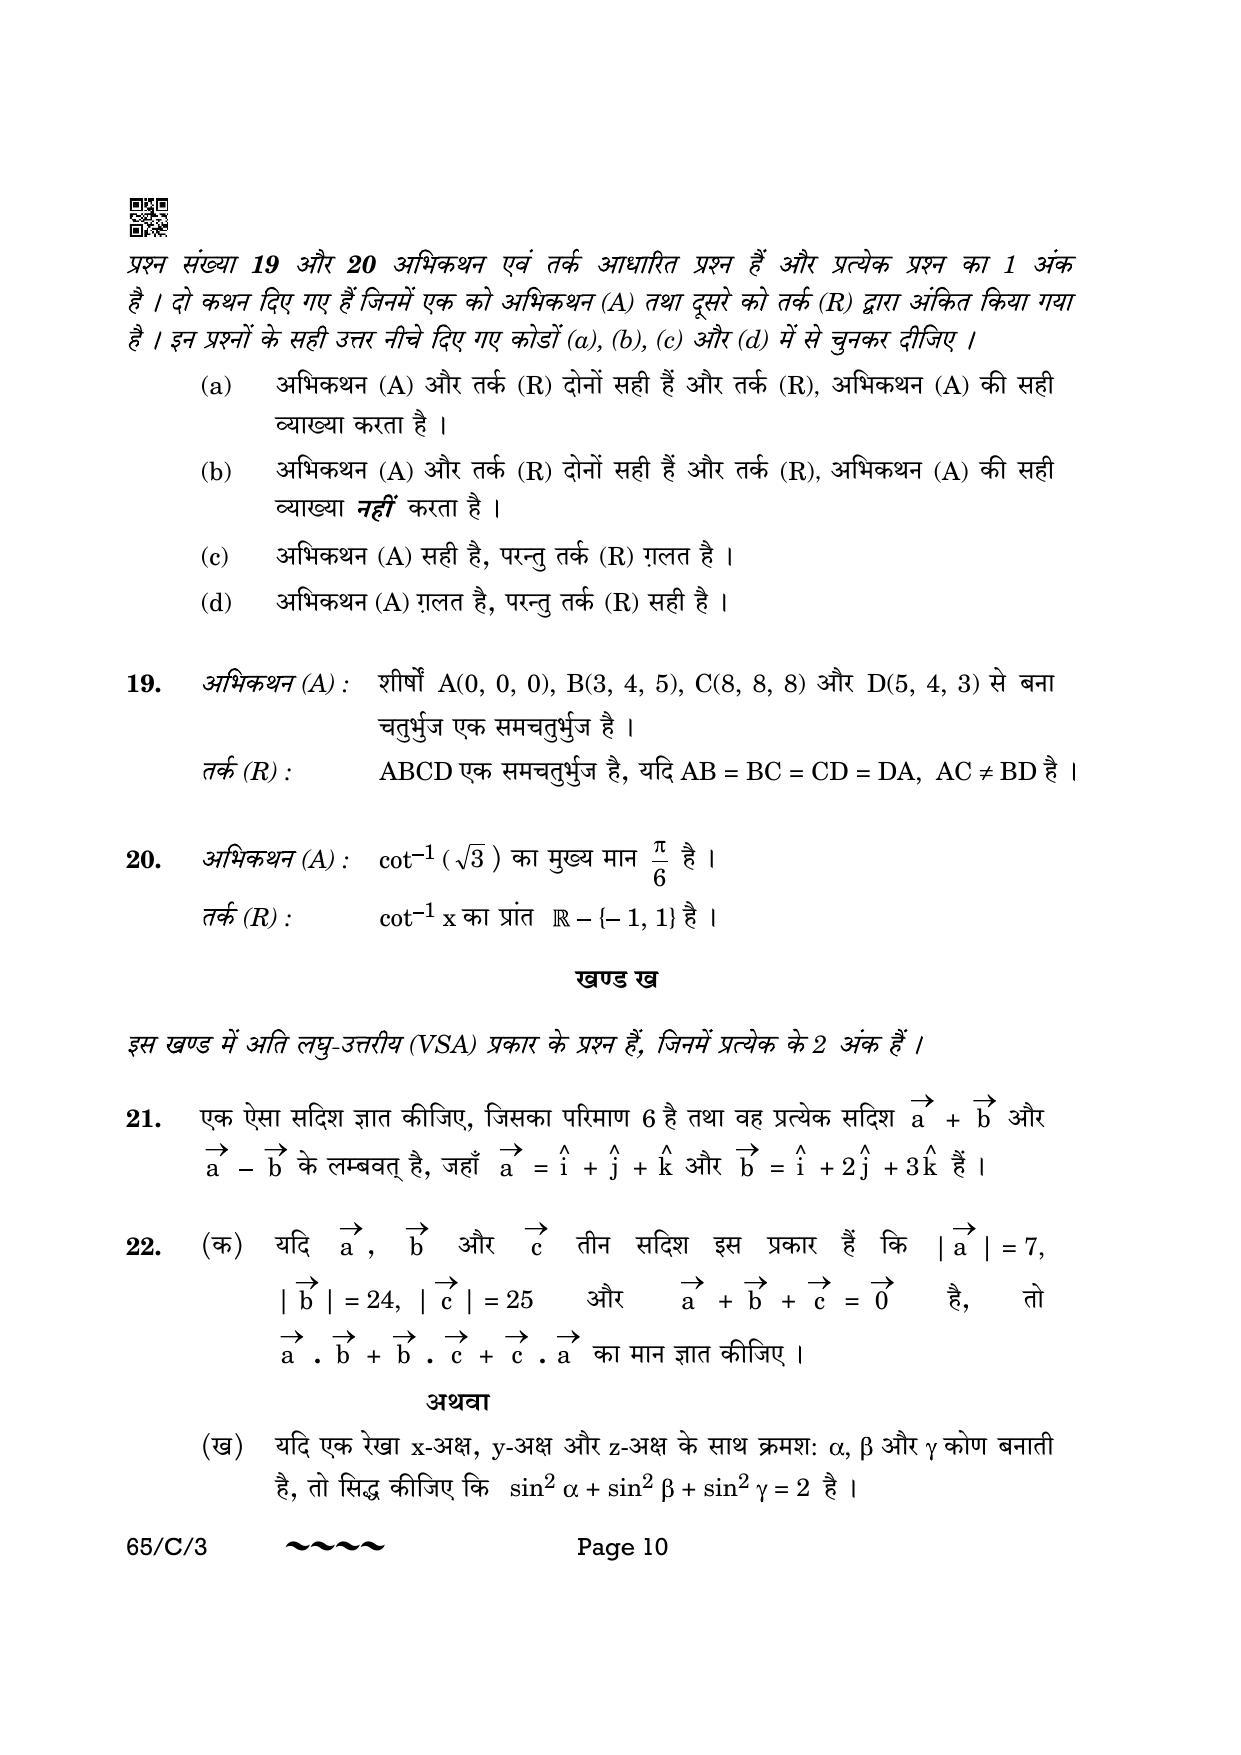 CBSE Class 12 65-3- Mathematics 2023 (Compartment) Question Paper - Page 10